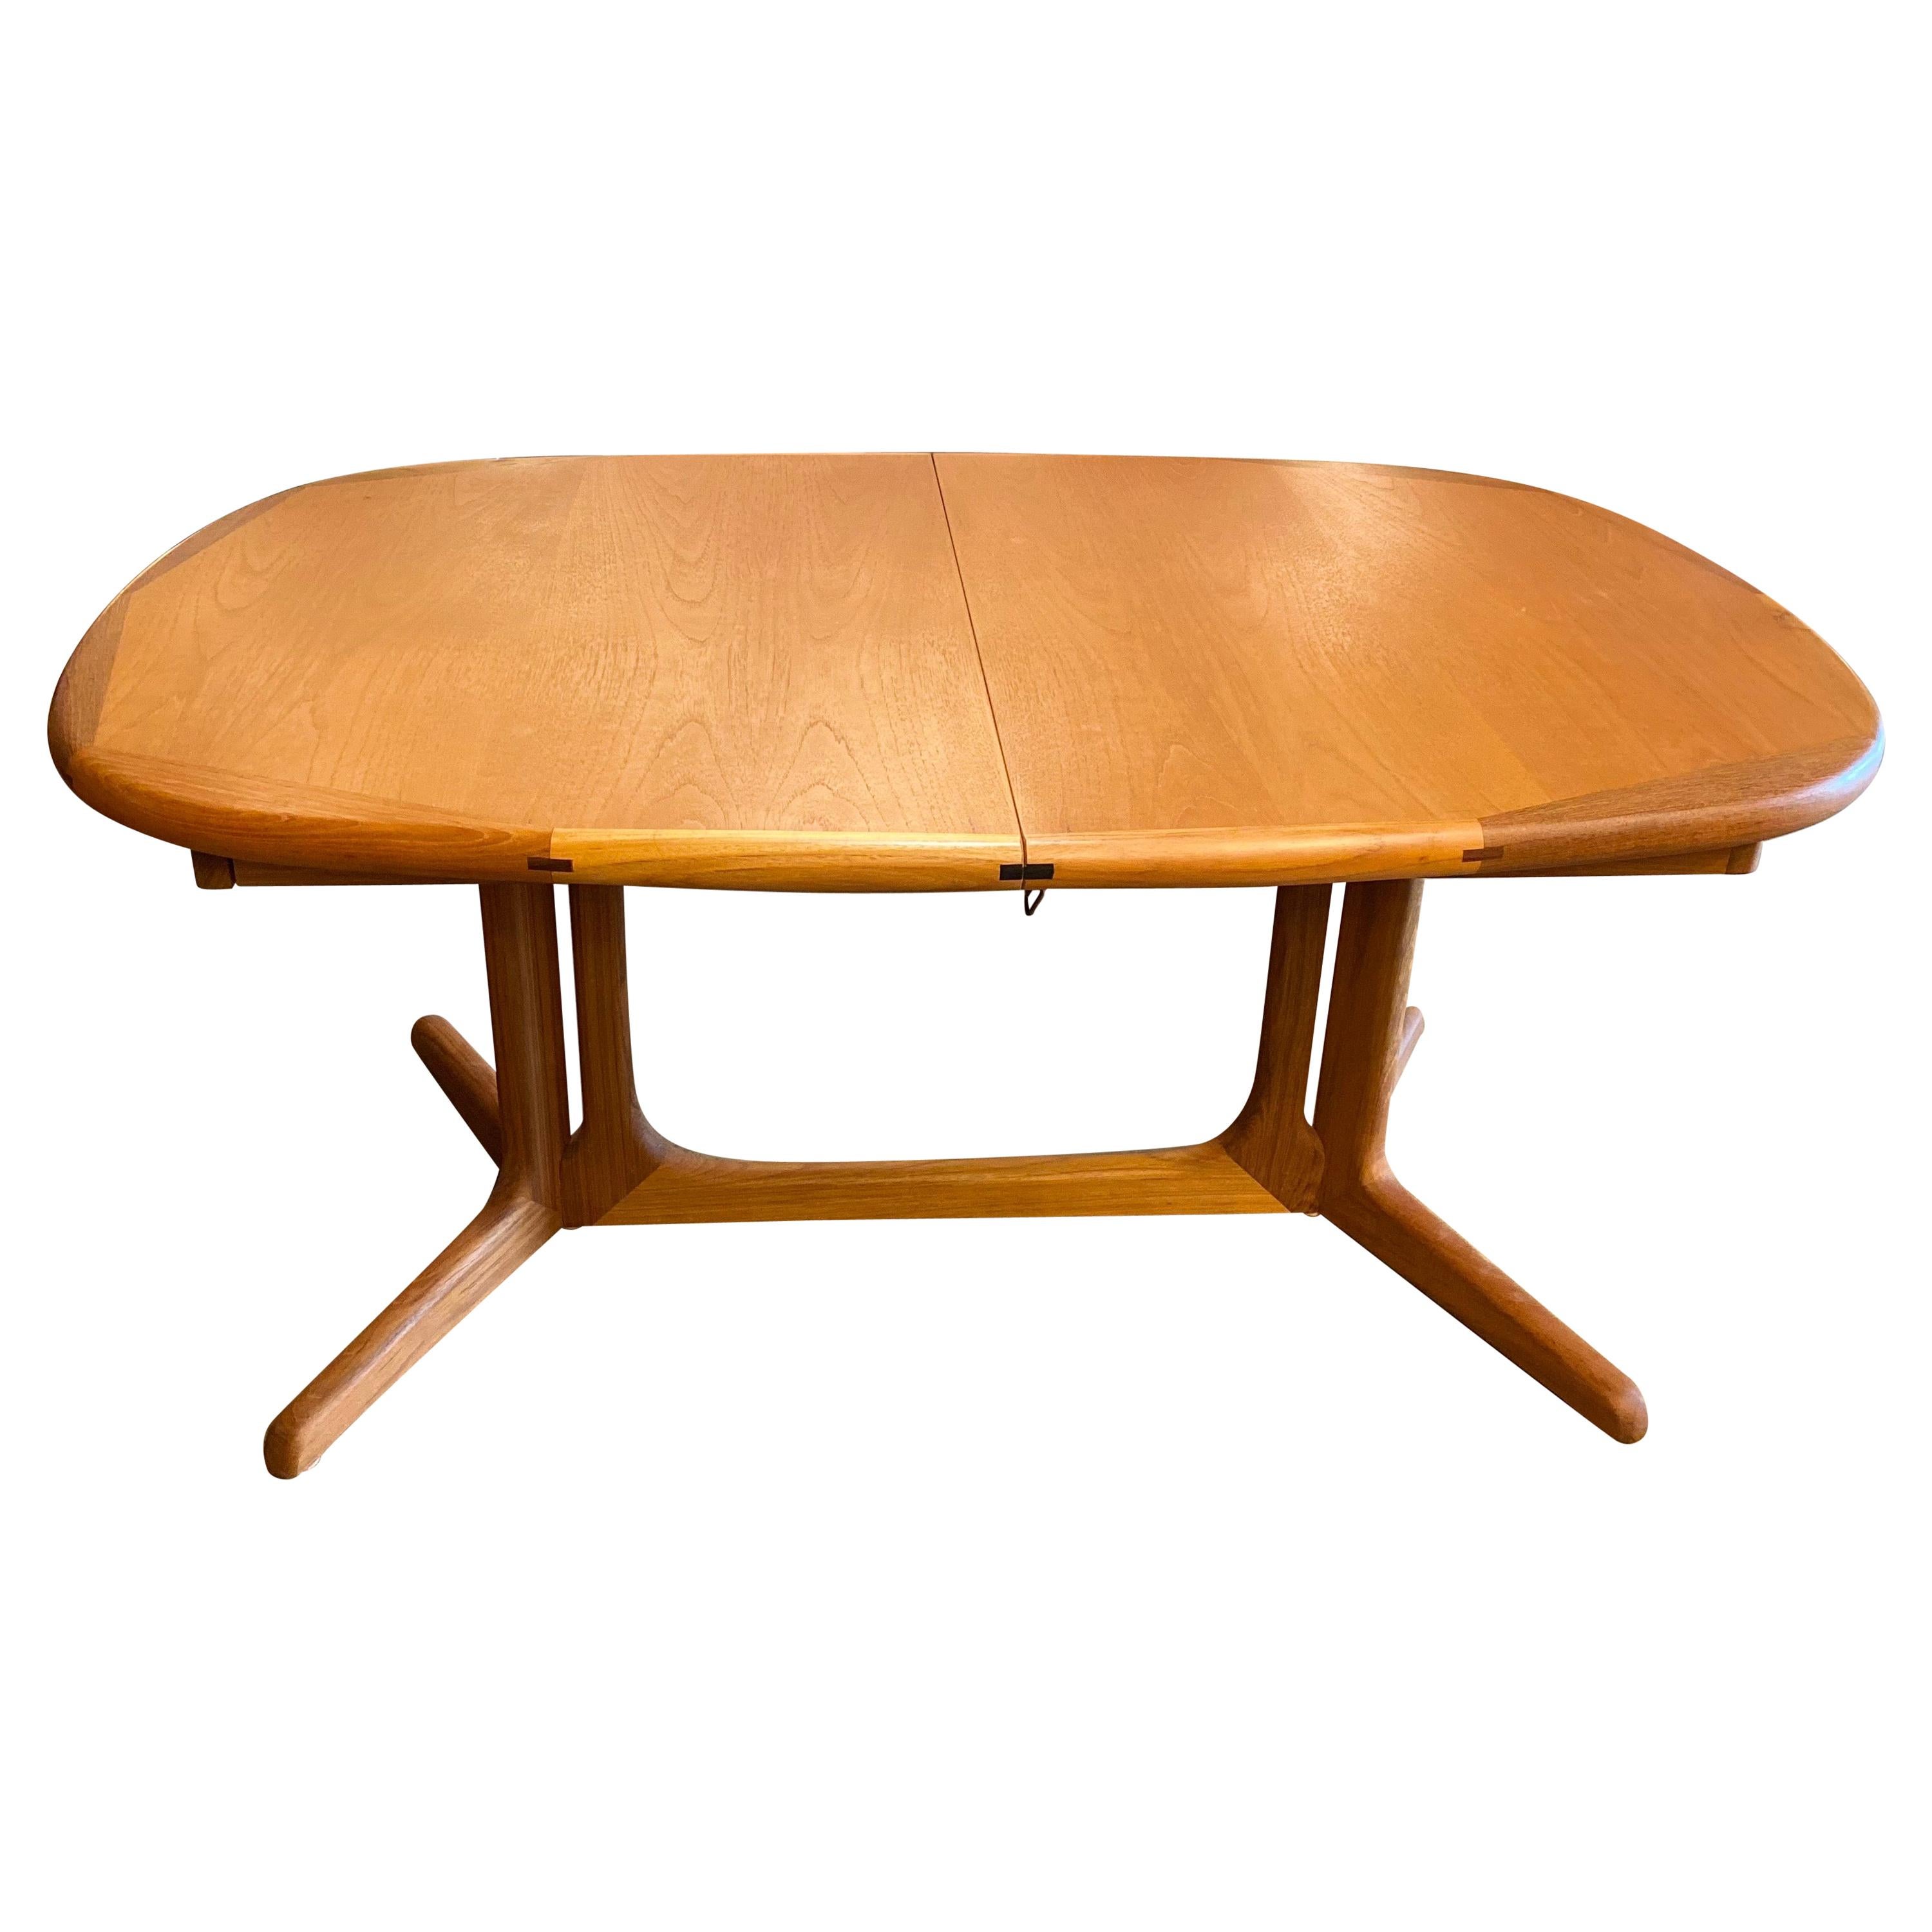 Danish Teak Dining Table with Two Leaves